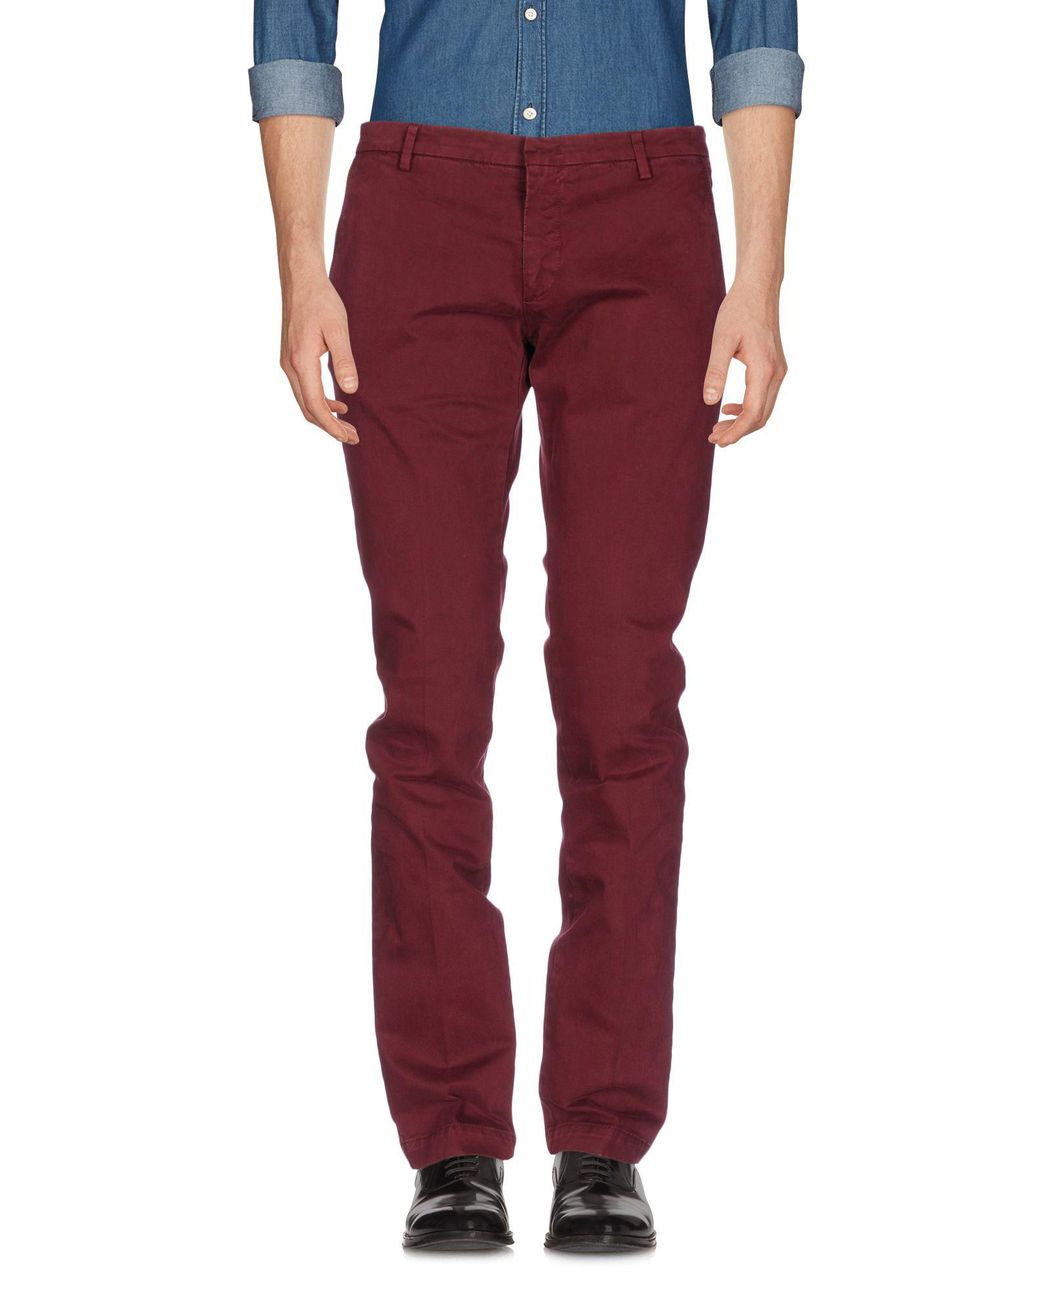 Michael Coal Cotton Casual Trouser in Maroon (Red) for Men - Lyst